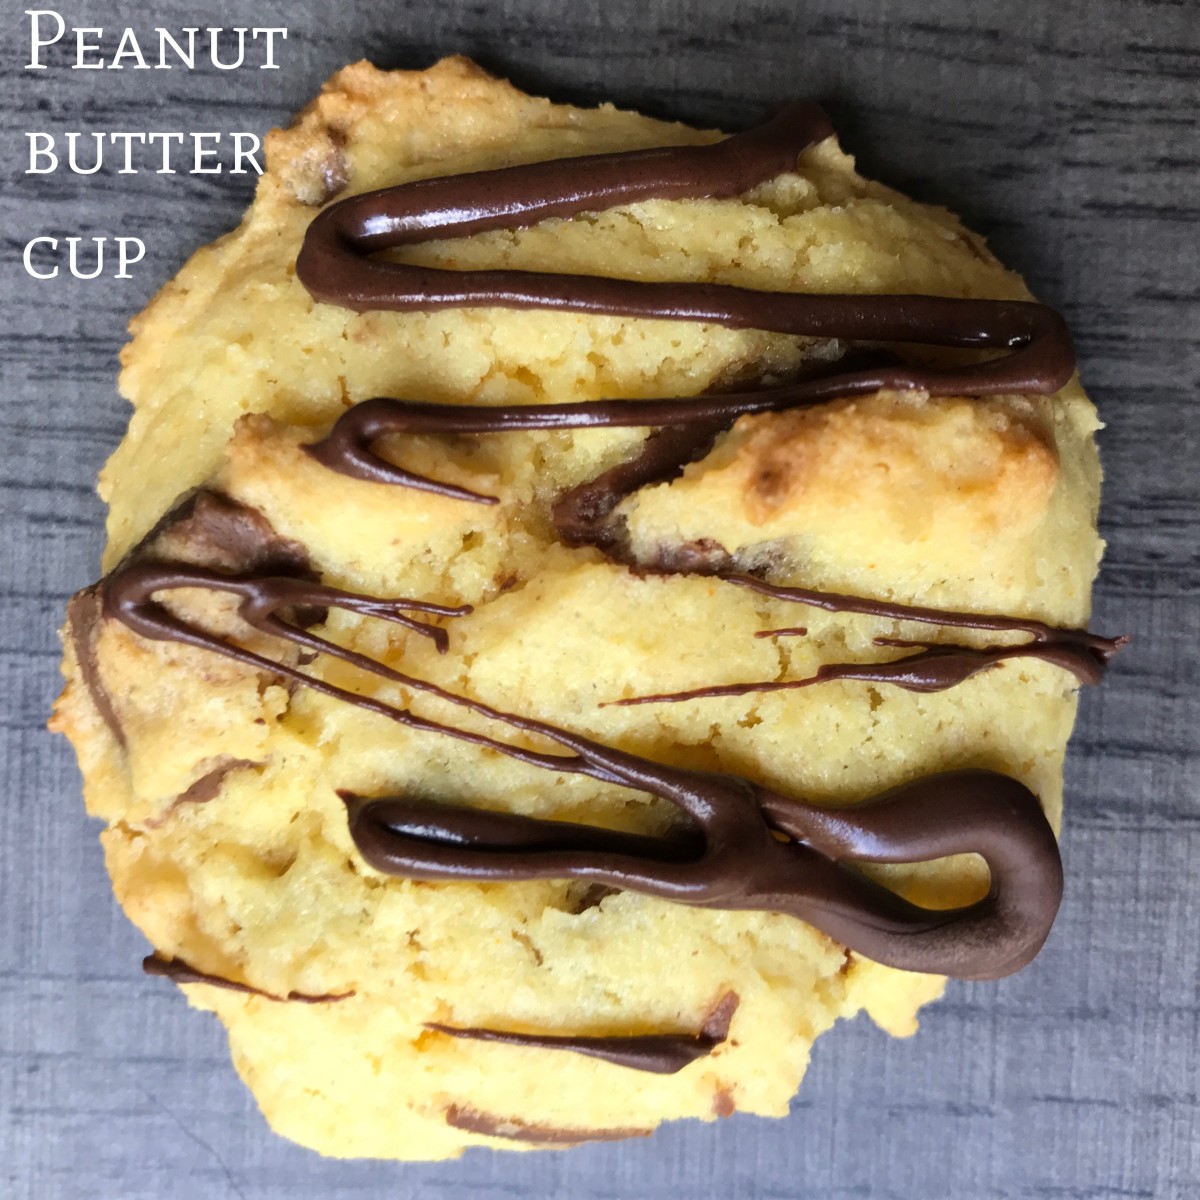 Peanut Butter Cup Cake Mix Cookies